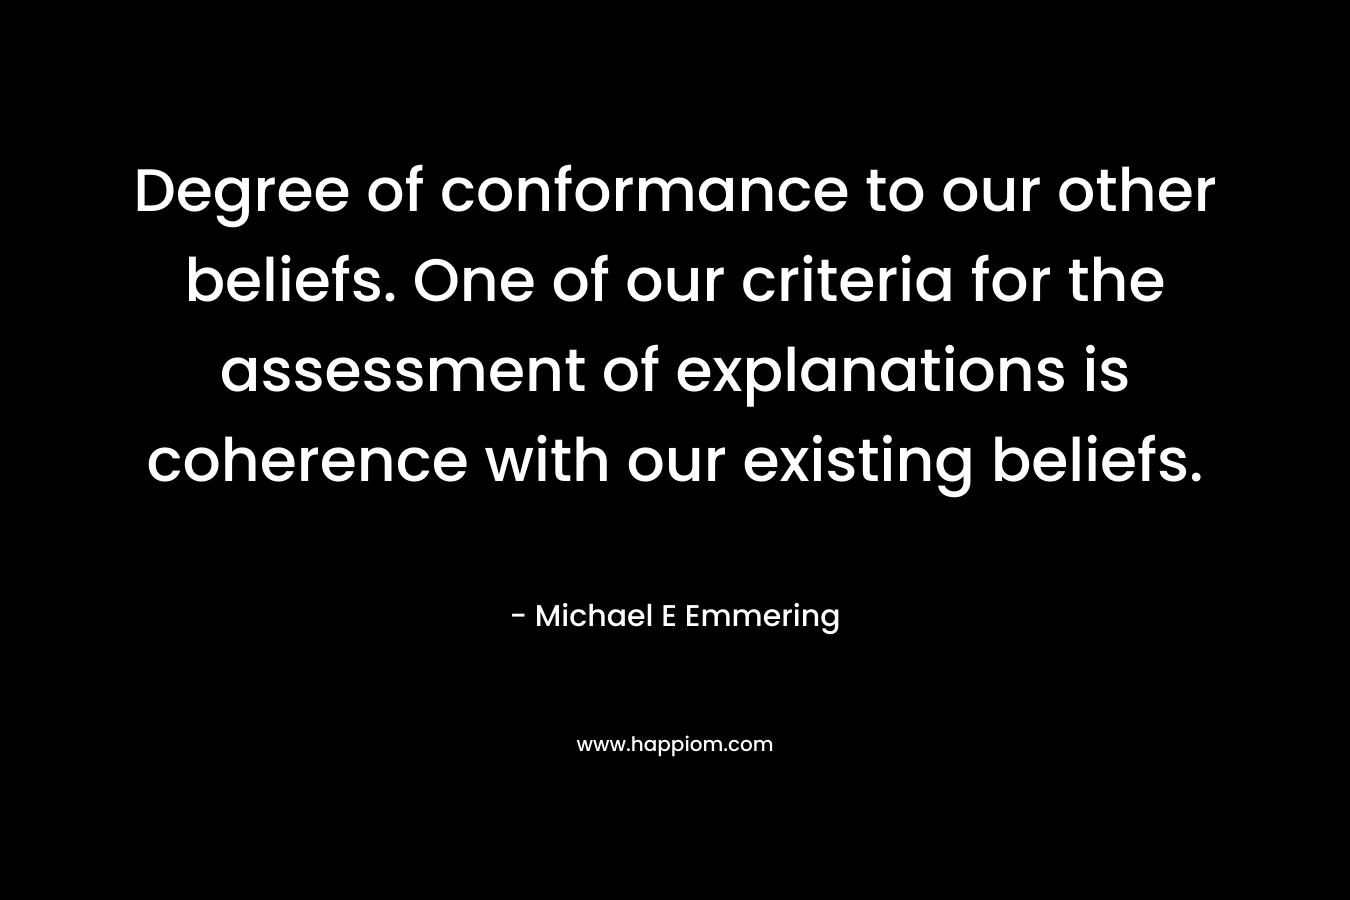 Degree of conformance to our other beliefs. One of our criteria for the assessment of explanations is coherence with our existing beliefs.